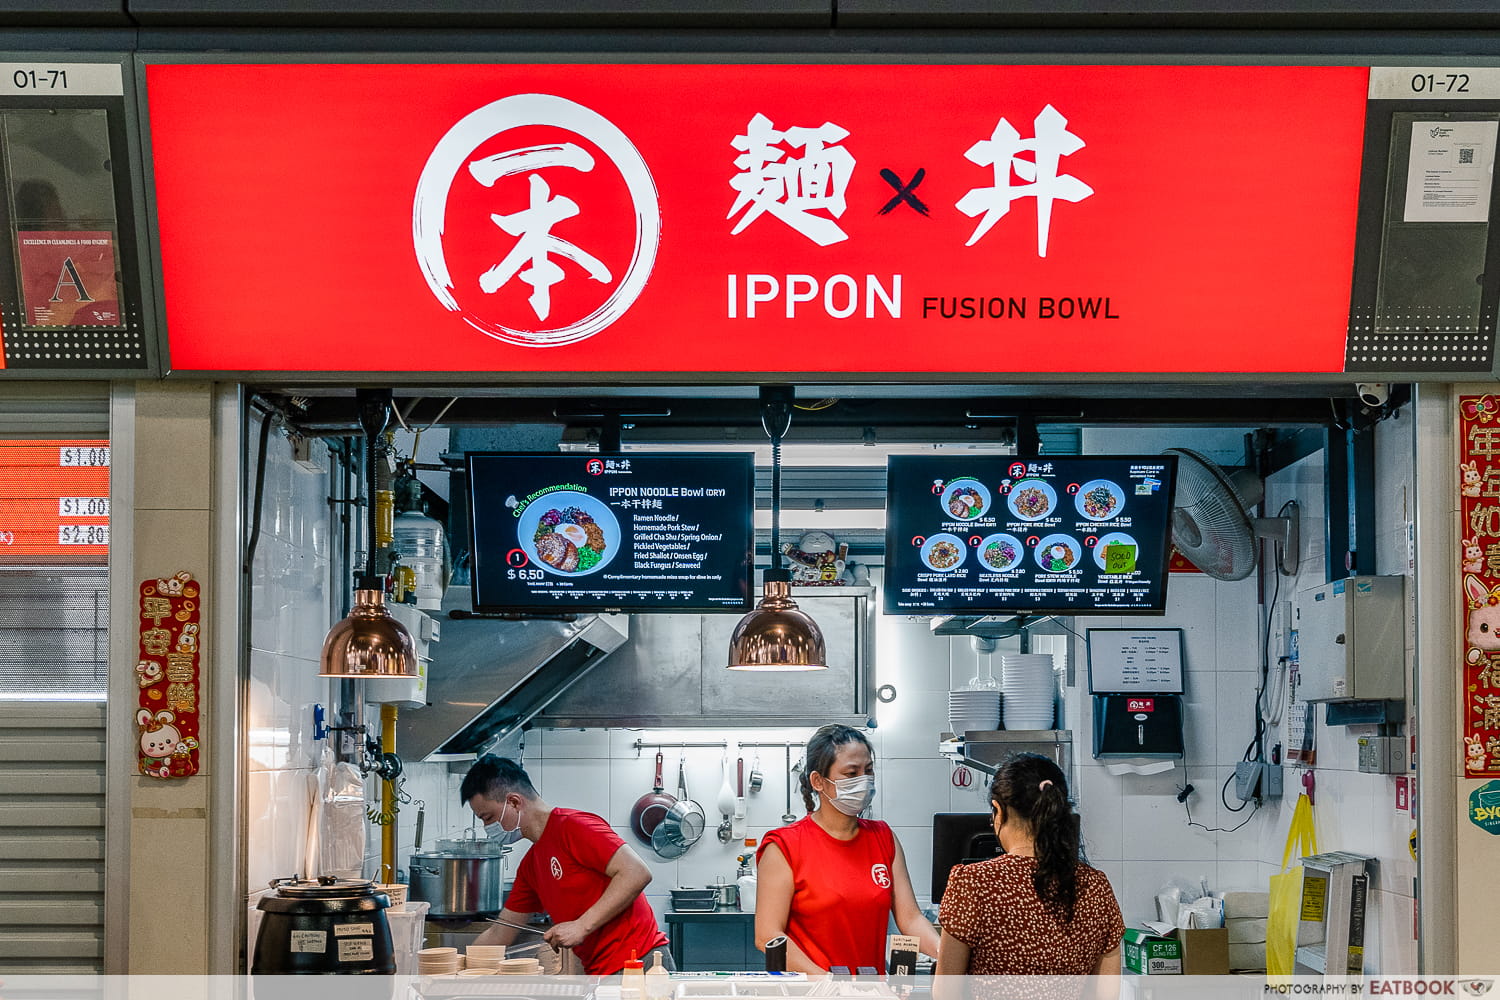 ippon fusion bowl storefront